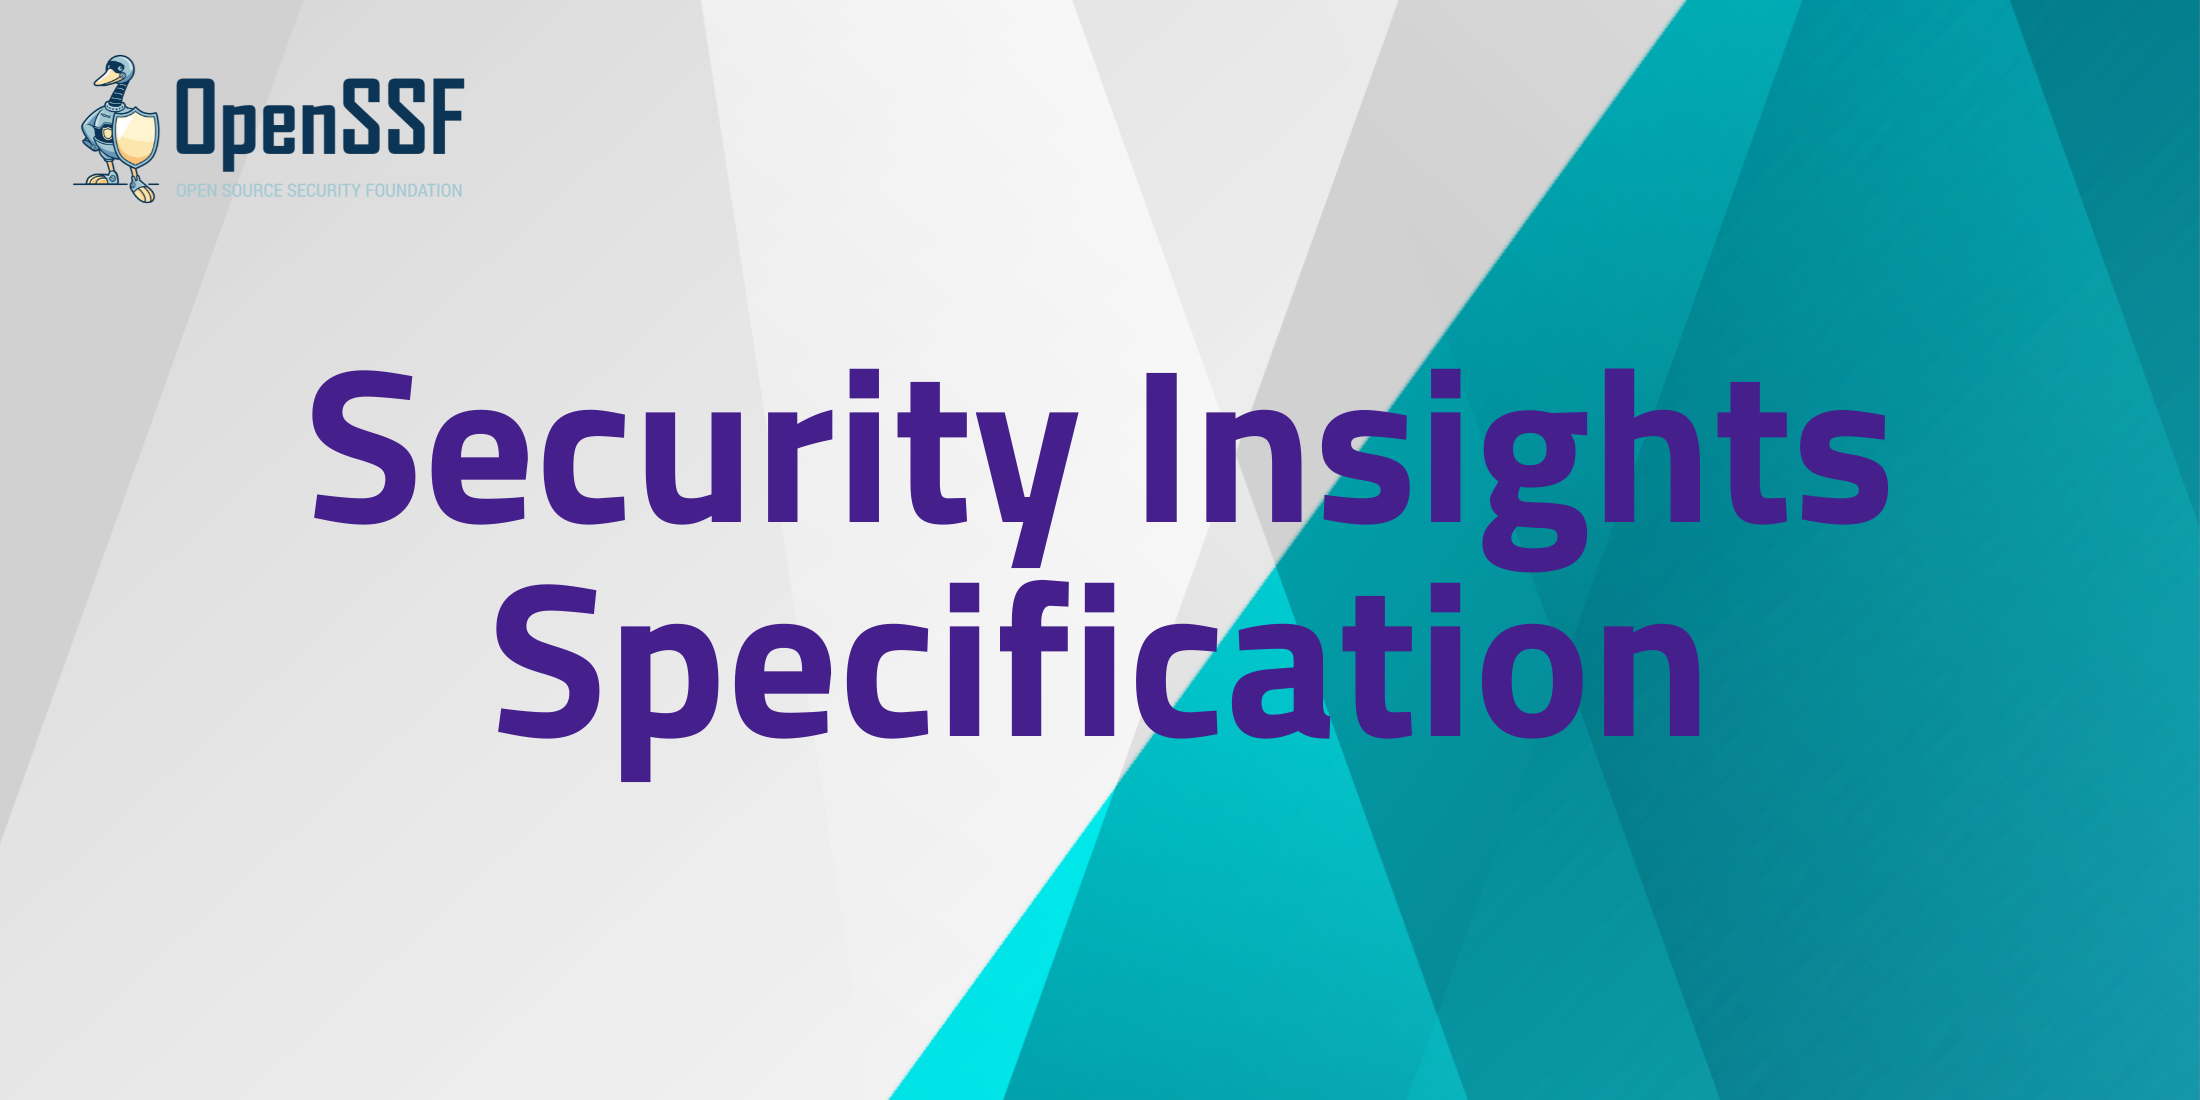 Security Insights Specification